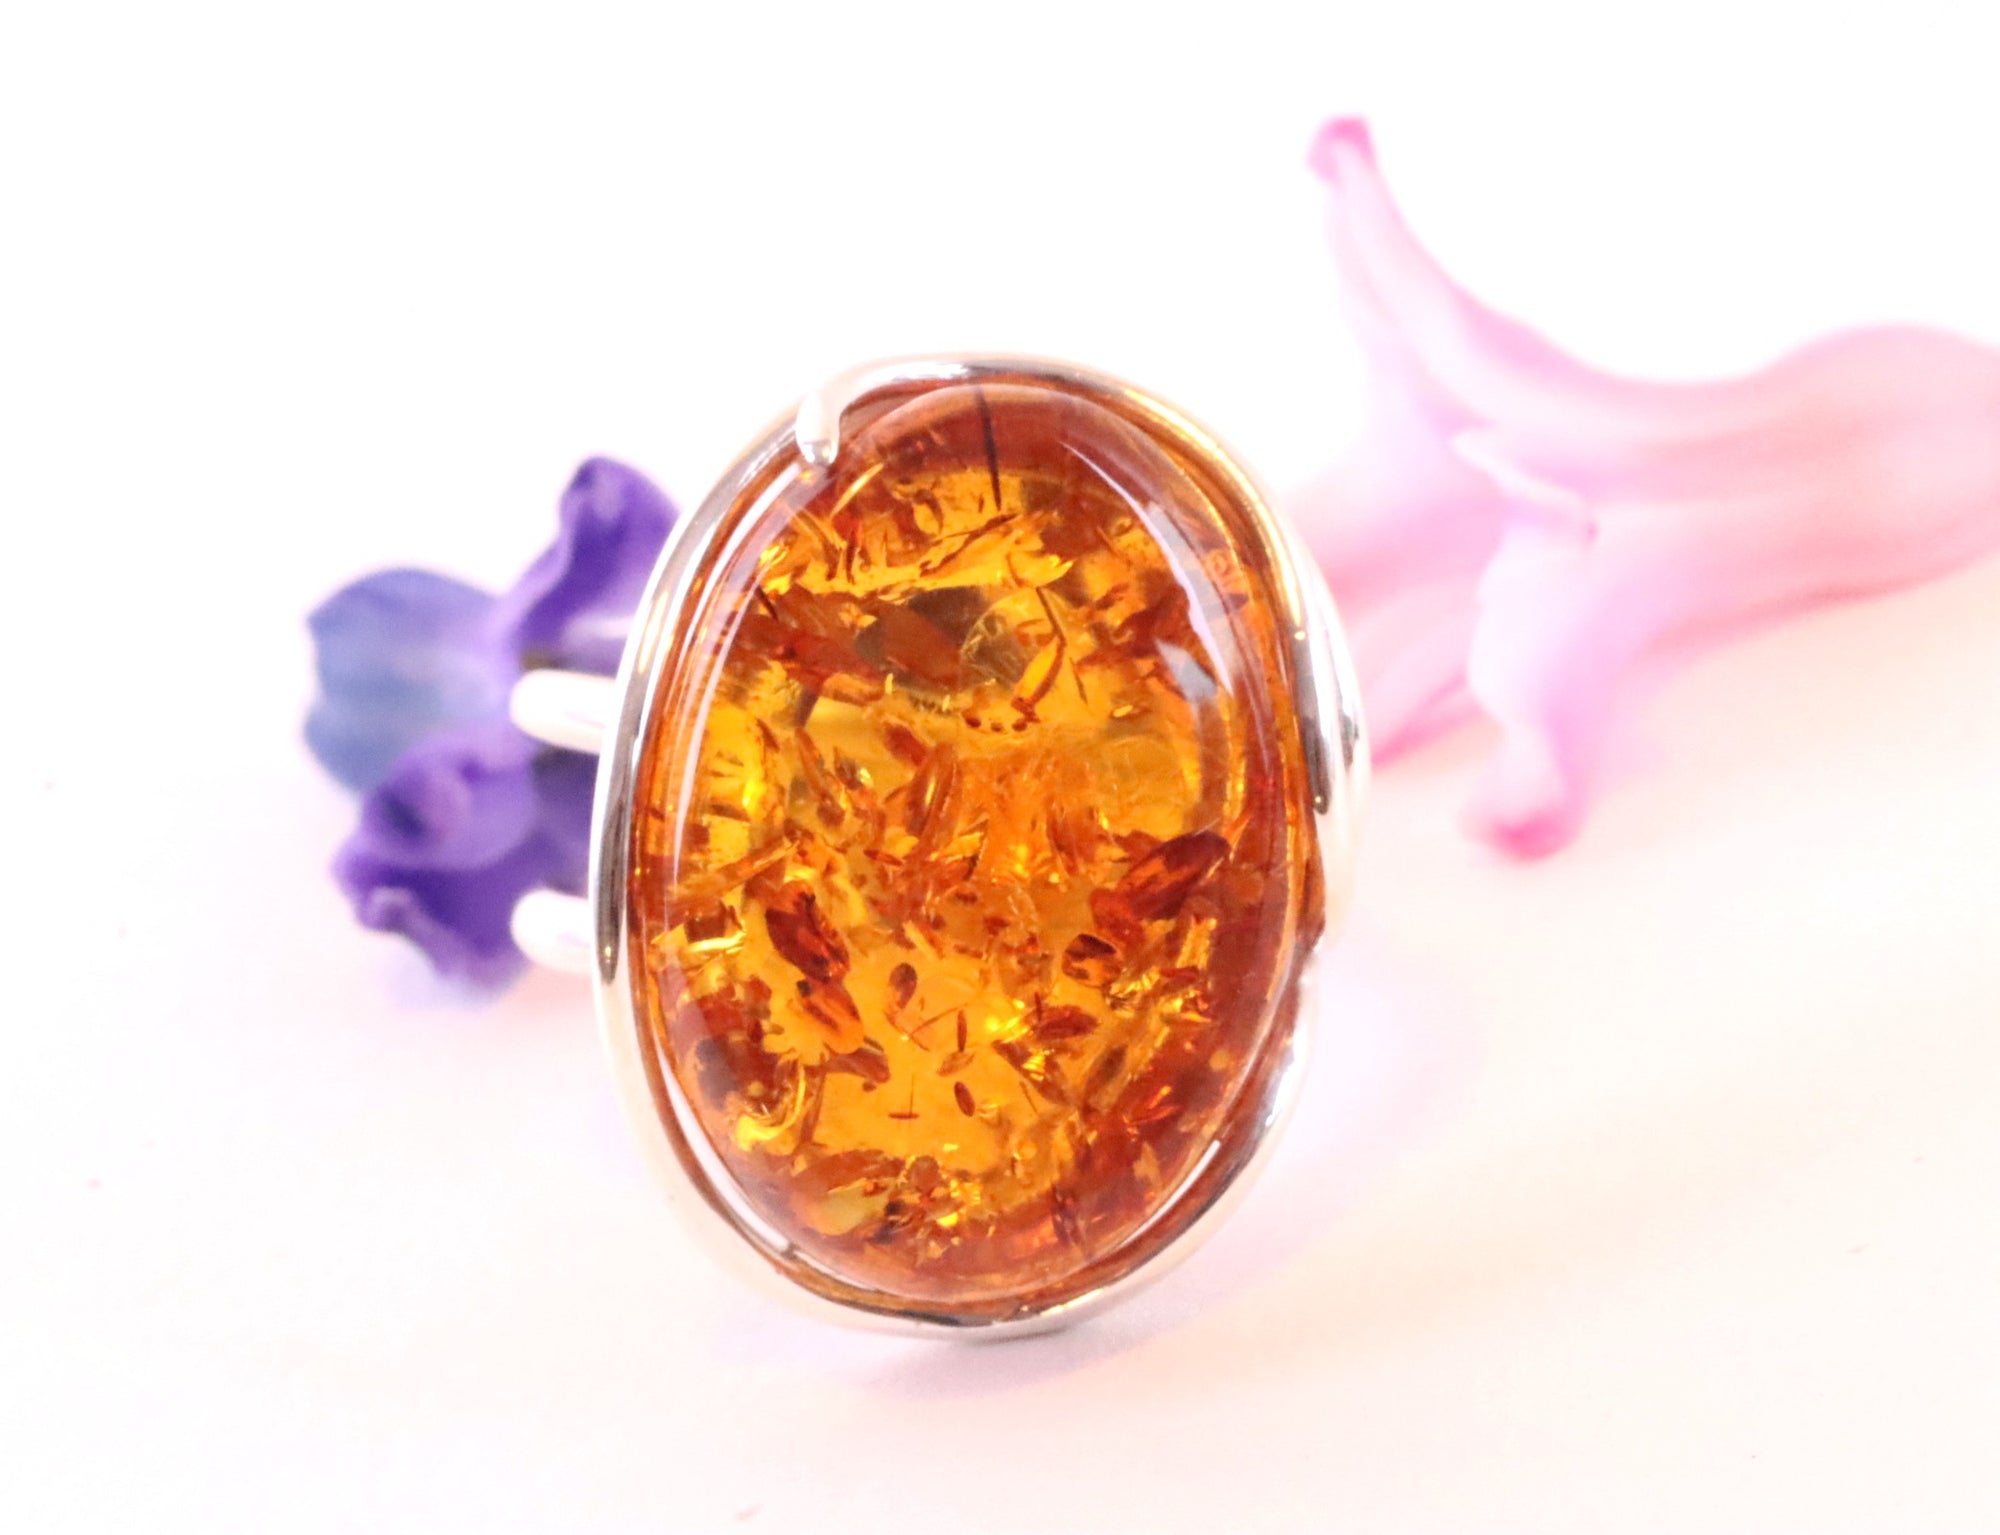 925 Sterling Silver Baltic Amber Ring